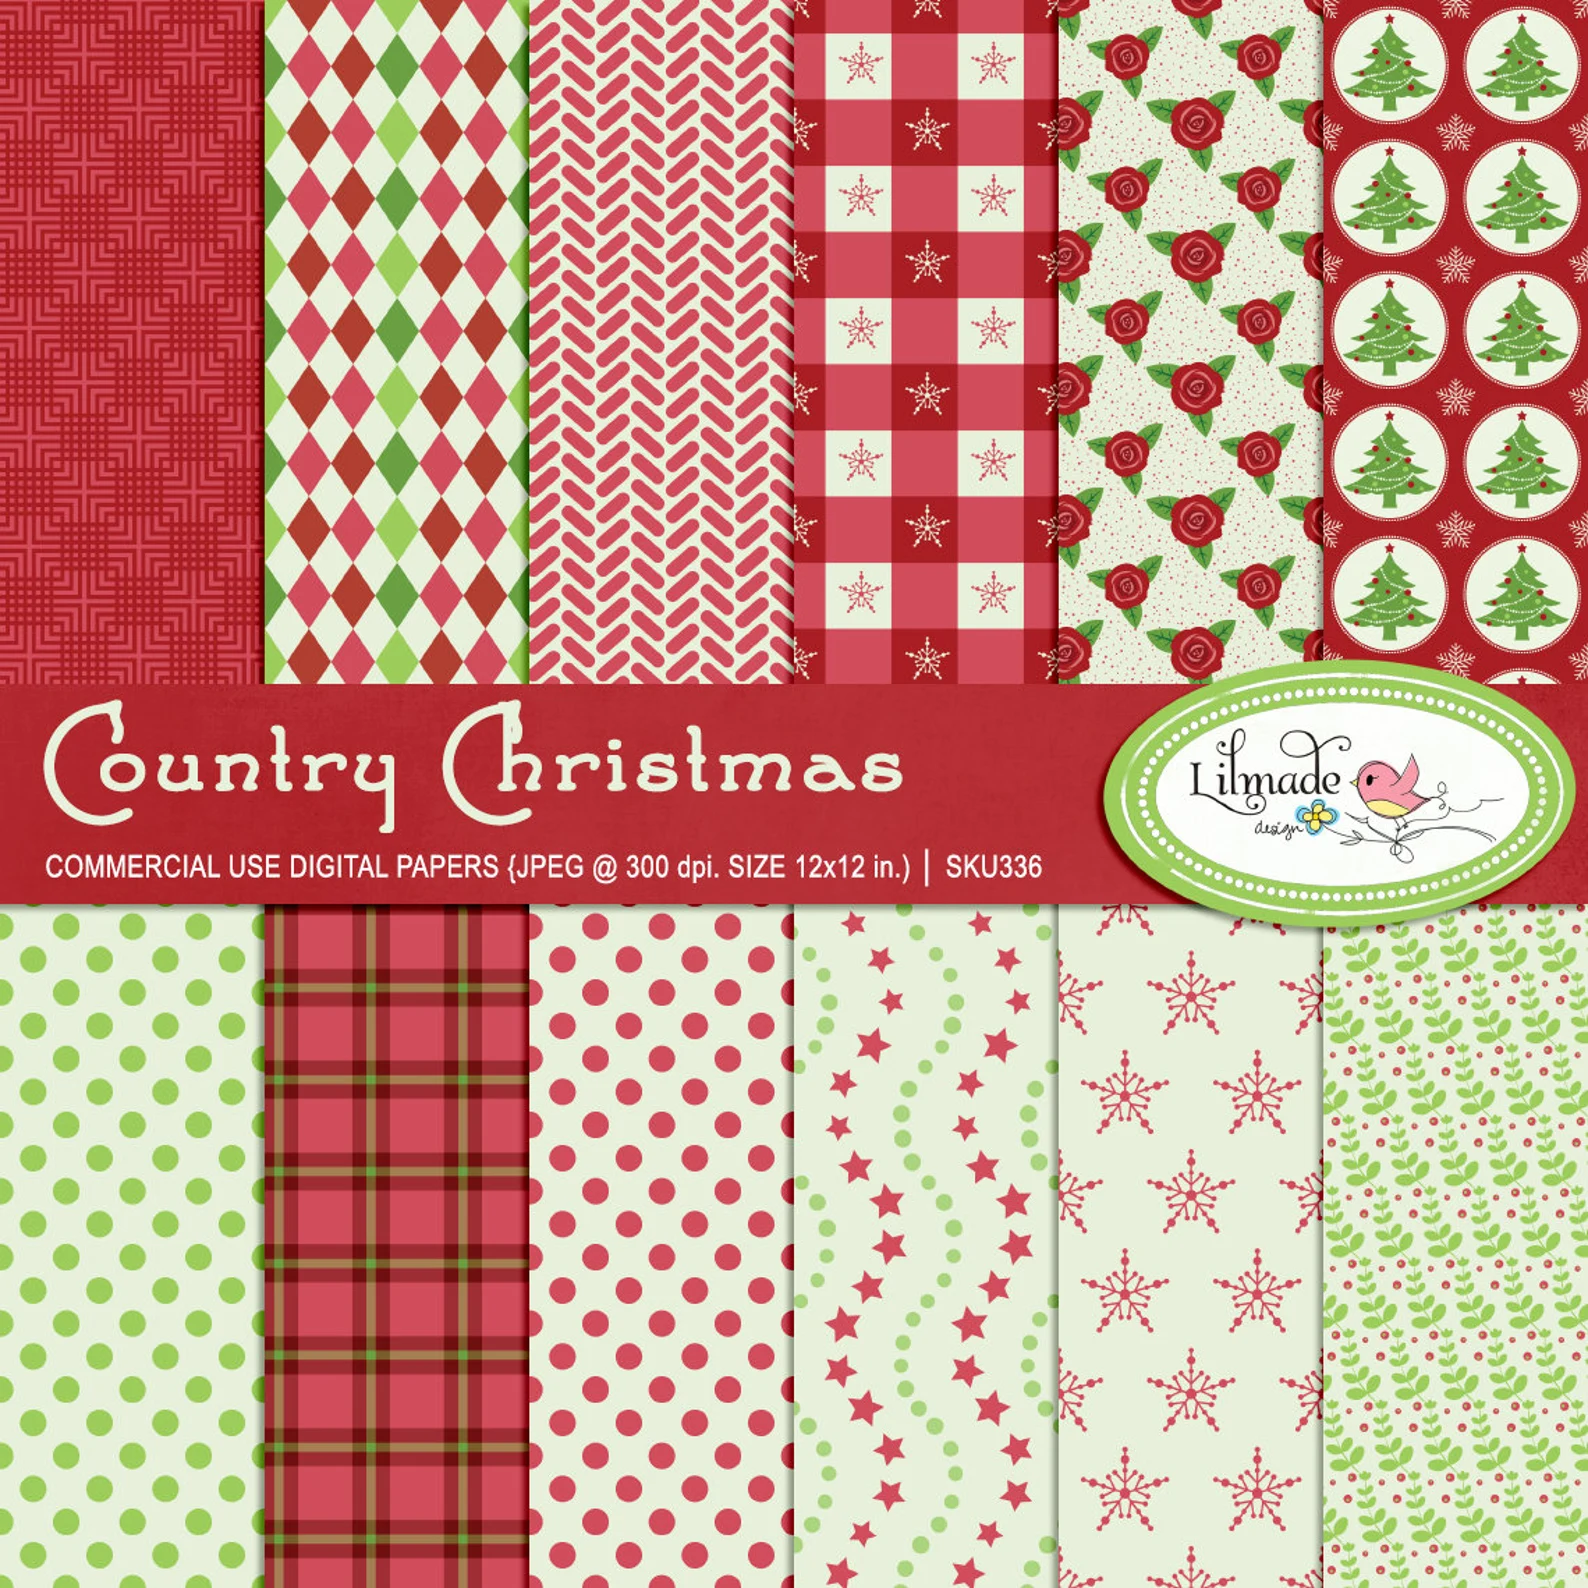 Country Christmas digital papers